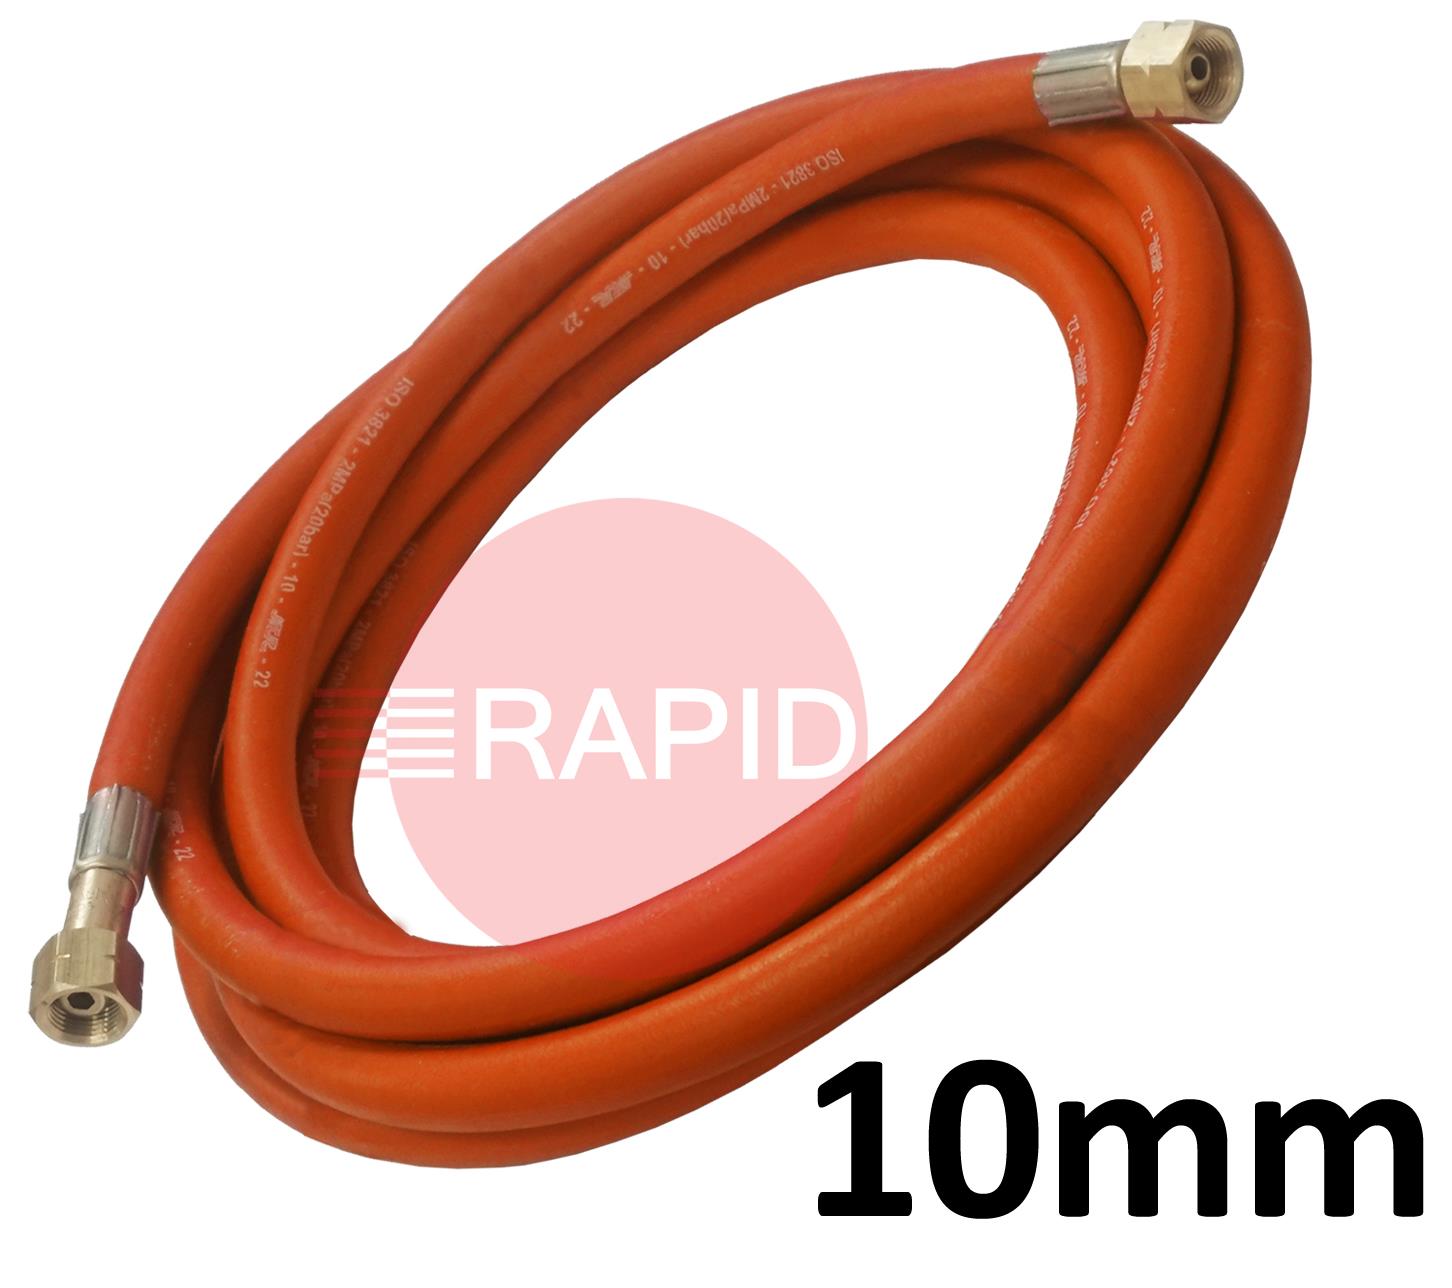 A5133  Fitted Propane Hose. 10mm Bore. G3/8 Check Valve & G3/8 Regulator Connection - 10m